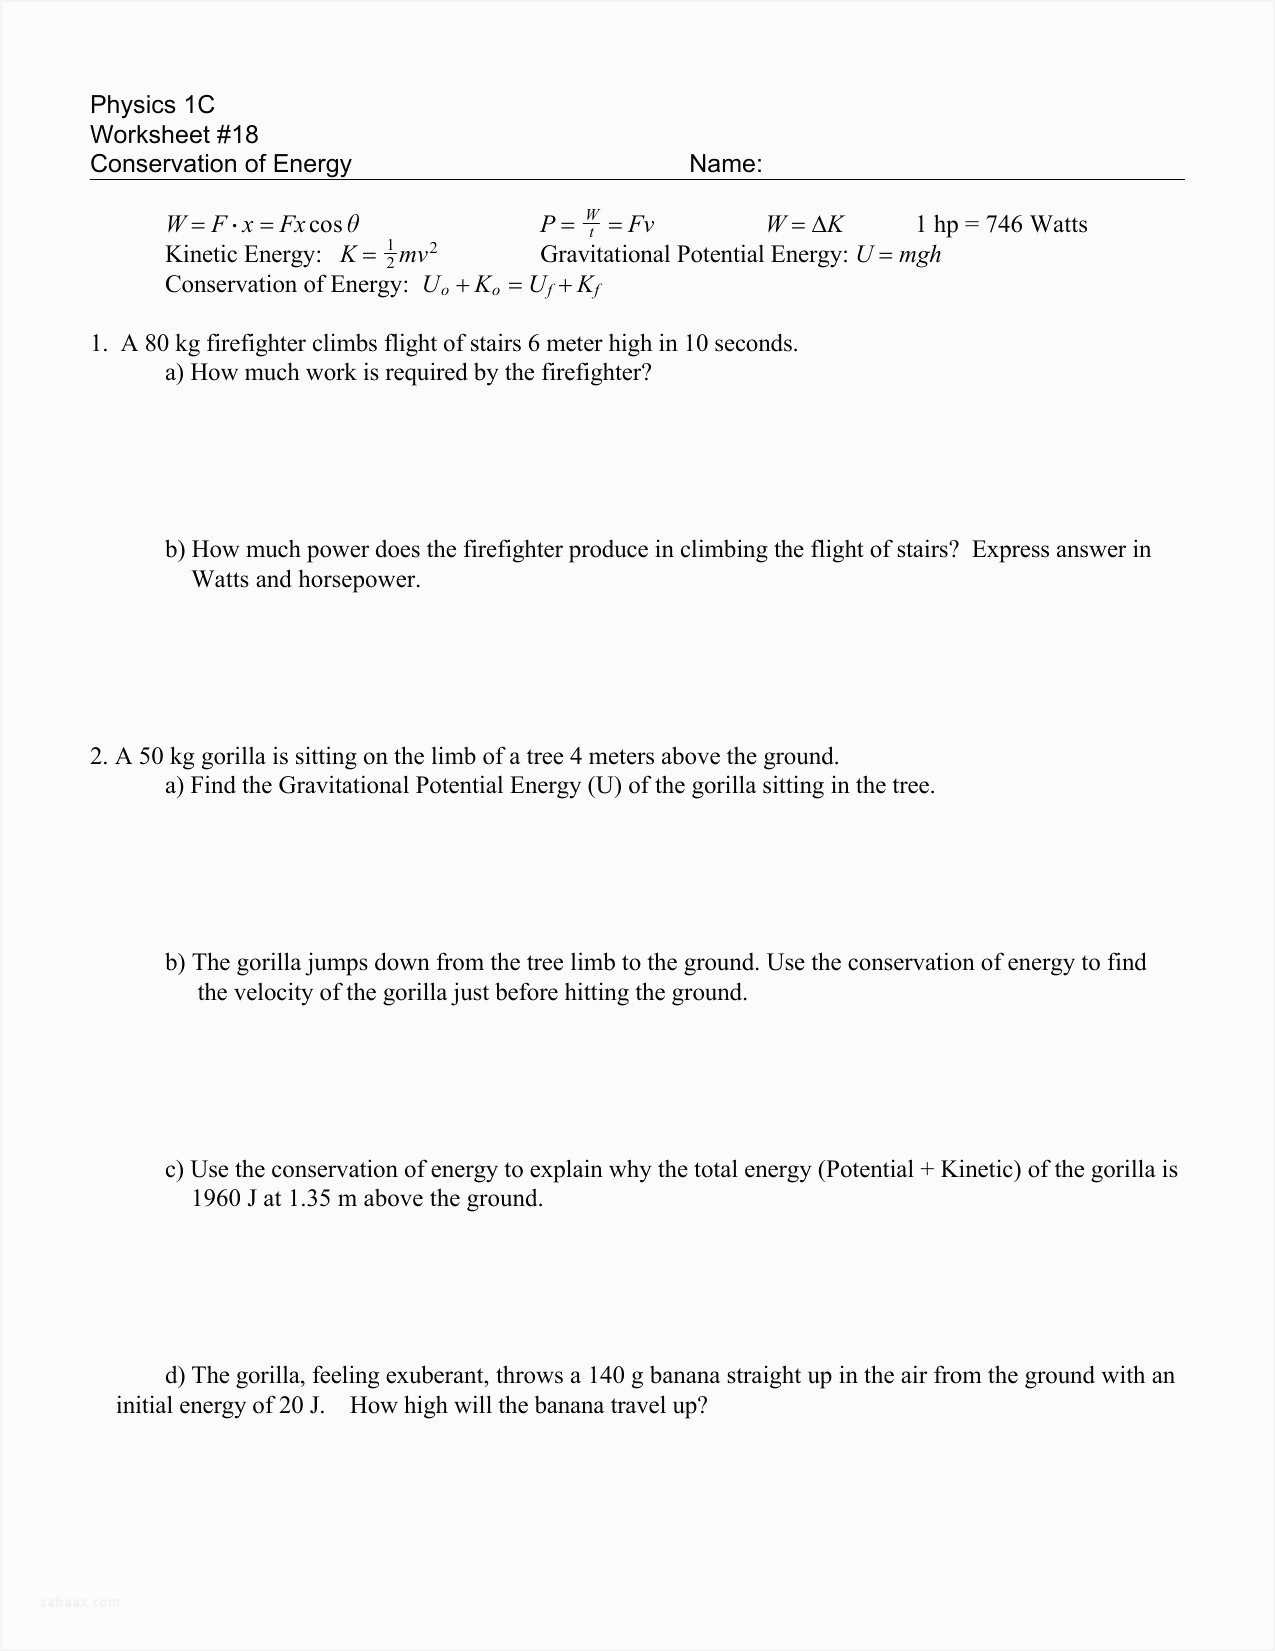 Potential and Kinetic Energy Roller Coaster Worksheet together with Kinetic and Potential Energy Worksheet Answers – Math Worksheets 2018